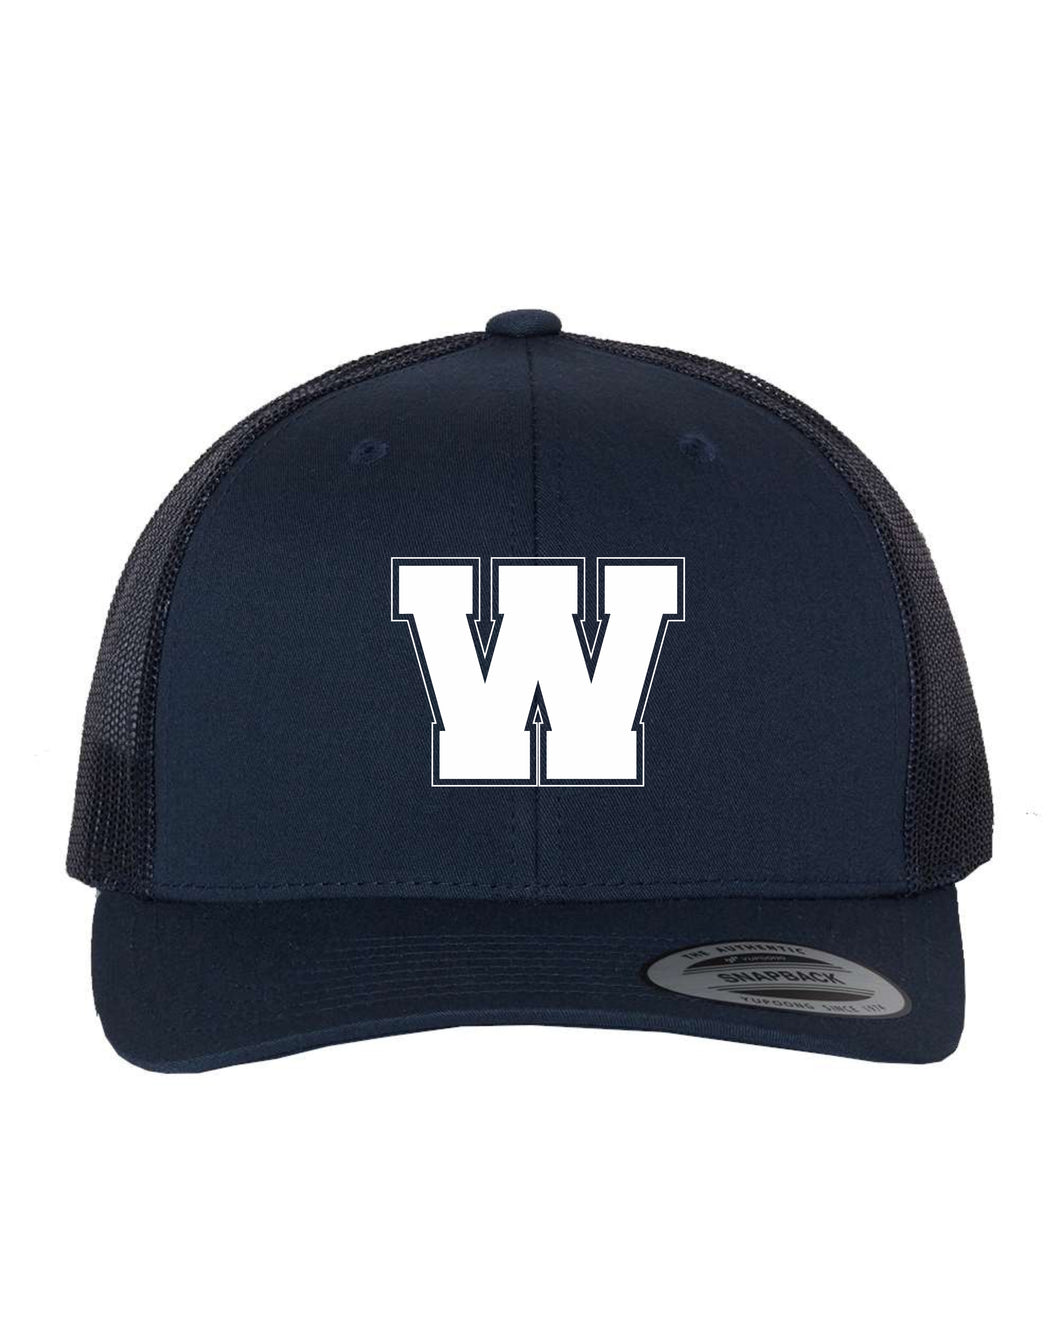 NAVY CURVED BRIM HATS - WALSHE W LOGO